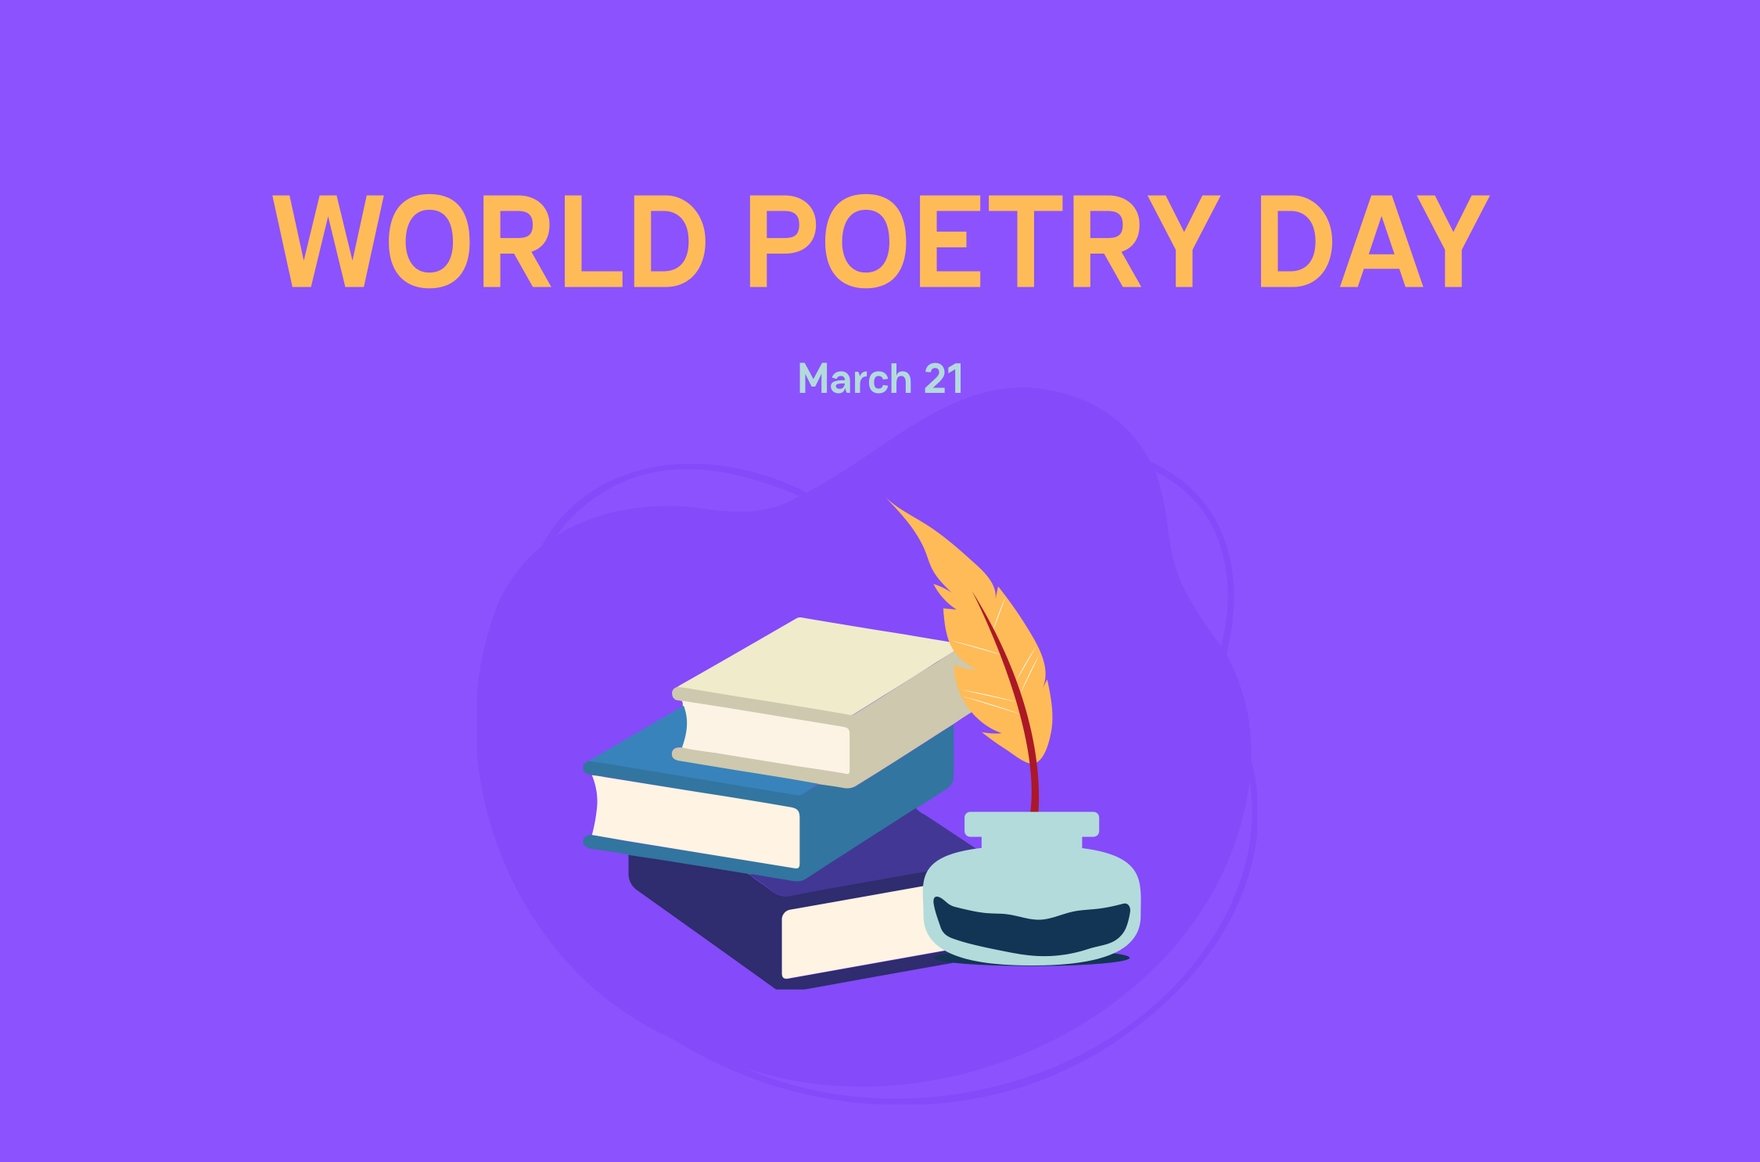 Free World Poetry Day Banner in Illustrator, PSD, EPS, SVG, PNG, JPEG